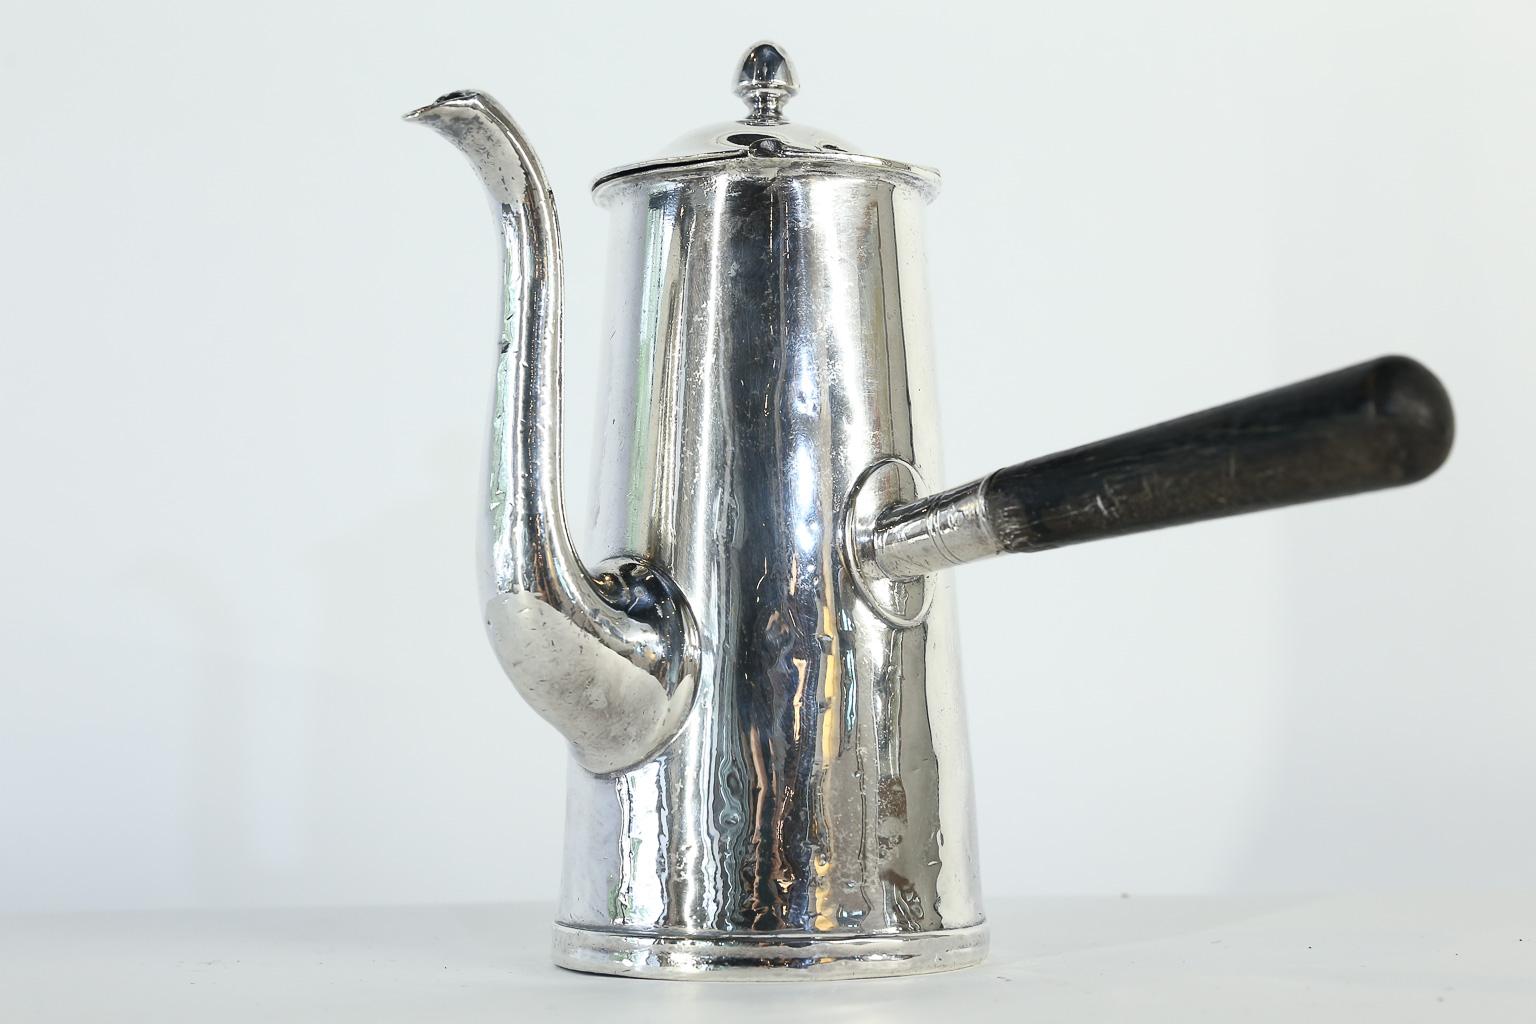 This silver soldered, hotel silver, Reed & Barton coffee or hot chocolate pot was manufactured for the United States Navy. The piece has a hinged top and a wood handle to keep hands cool while serving. Marked on the bottom, REED & BARTON, SILVER